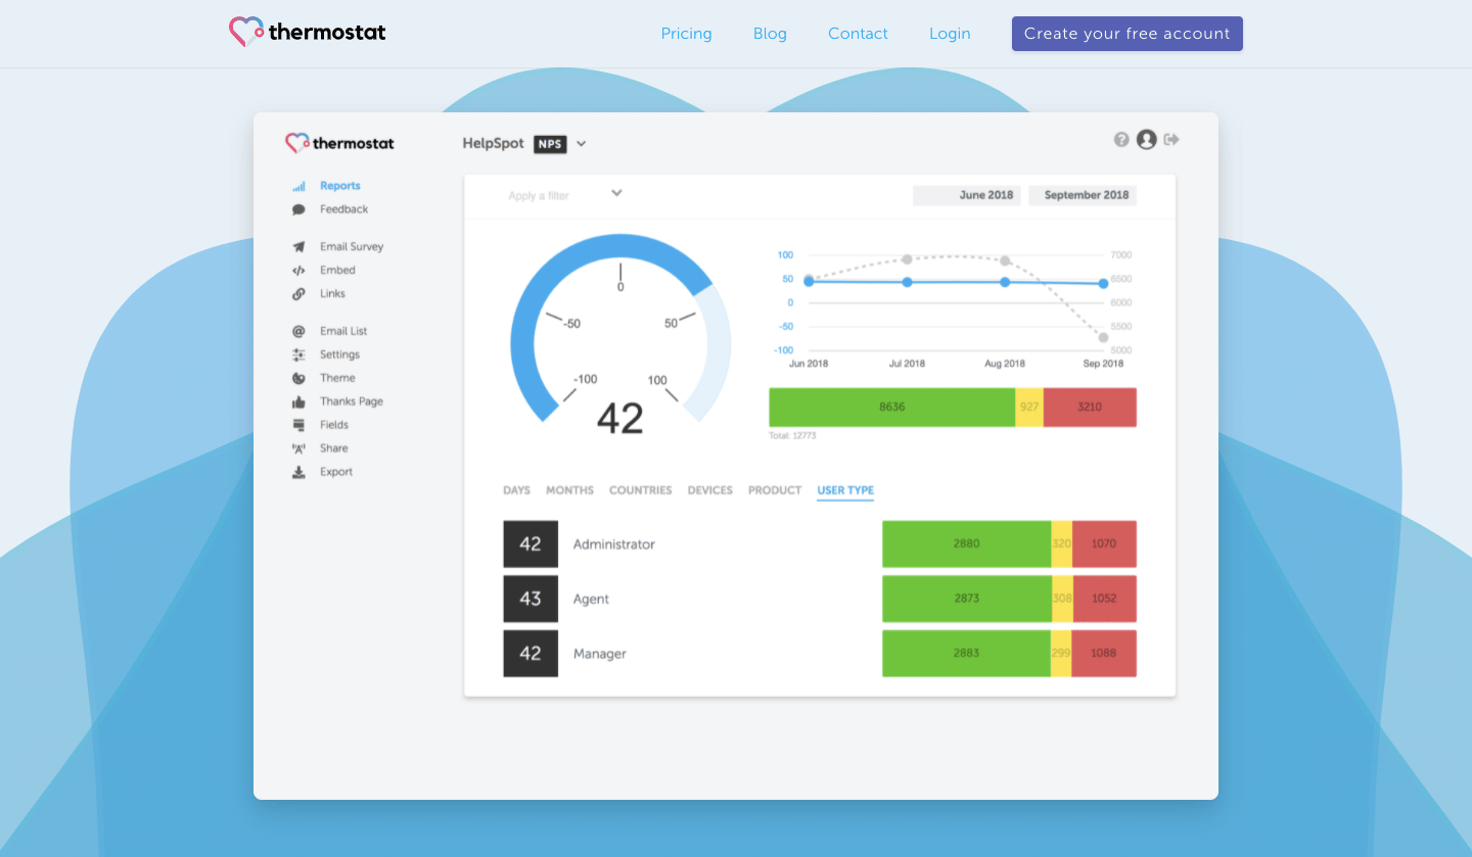 Thermostat Net Promoter Scores and Customer Satisfaction Scores